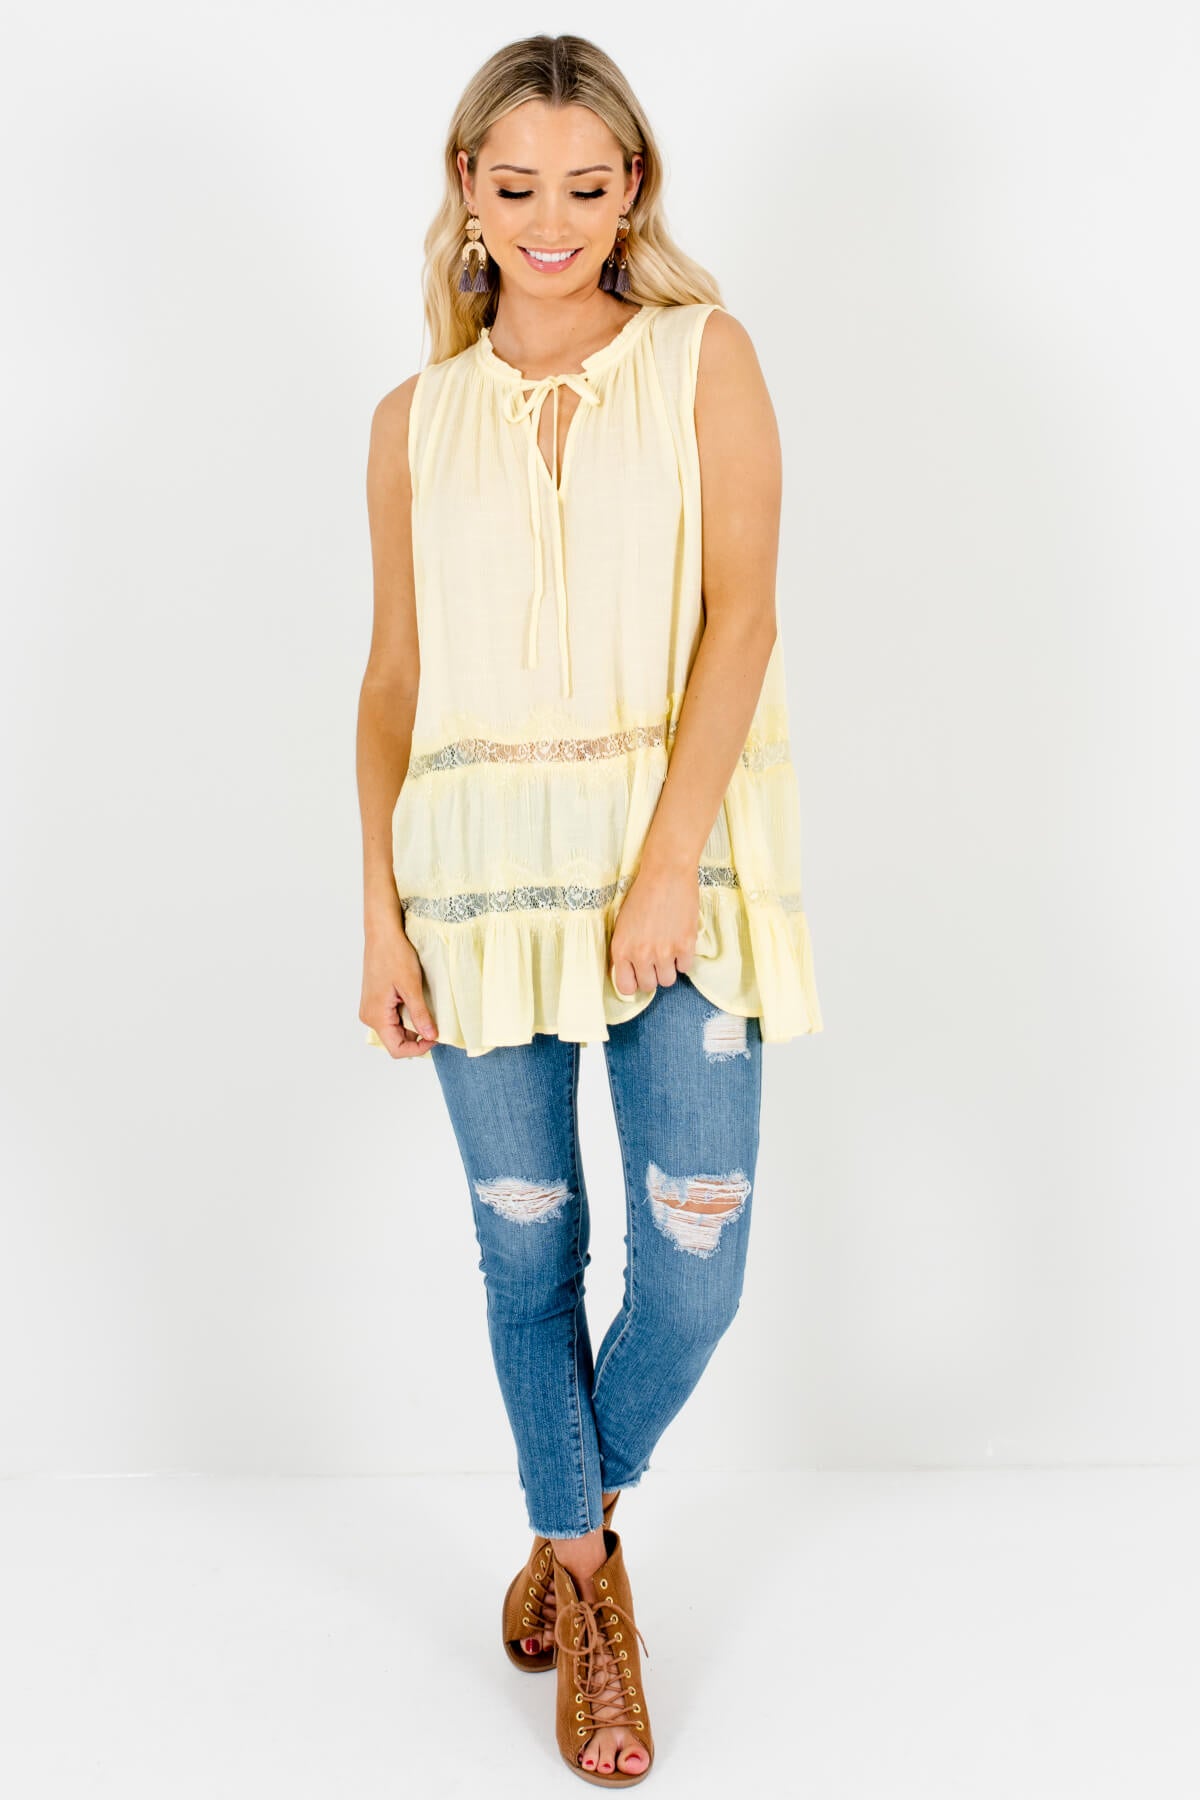 Yellow Eyelash Lace Peasant Tank Tops Affordable Online Boutique